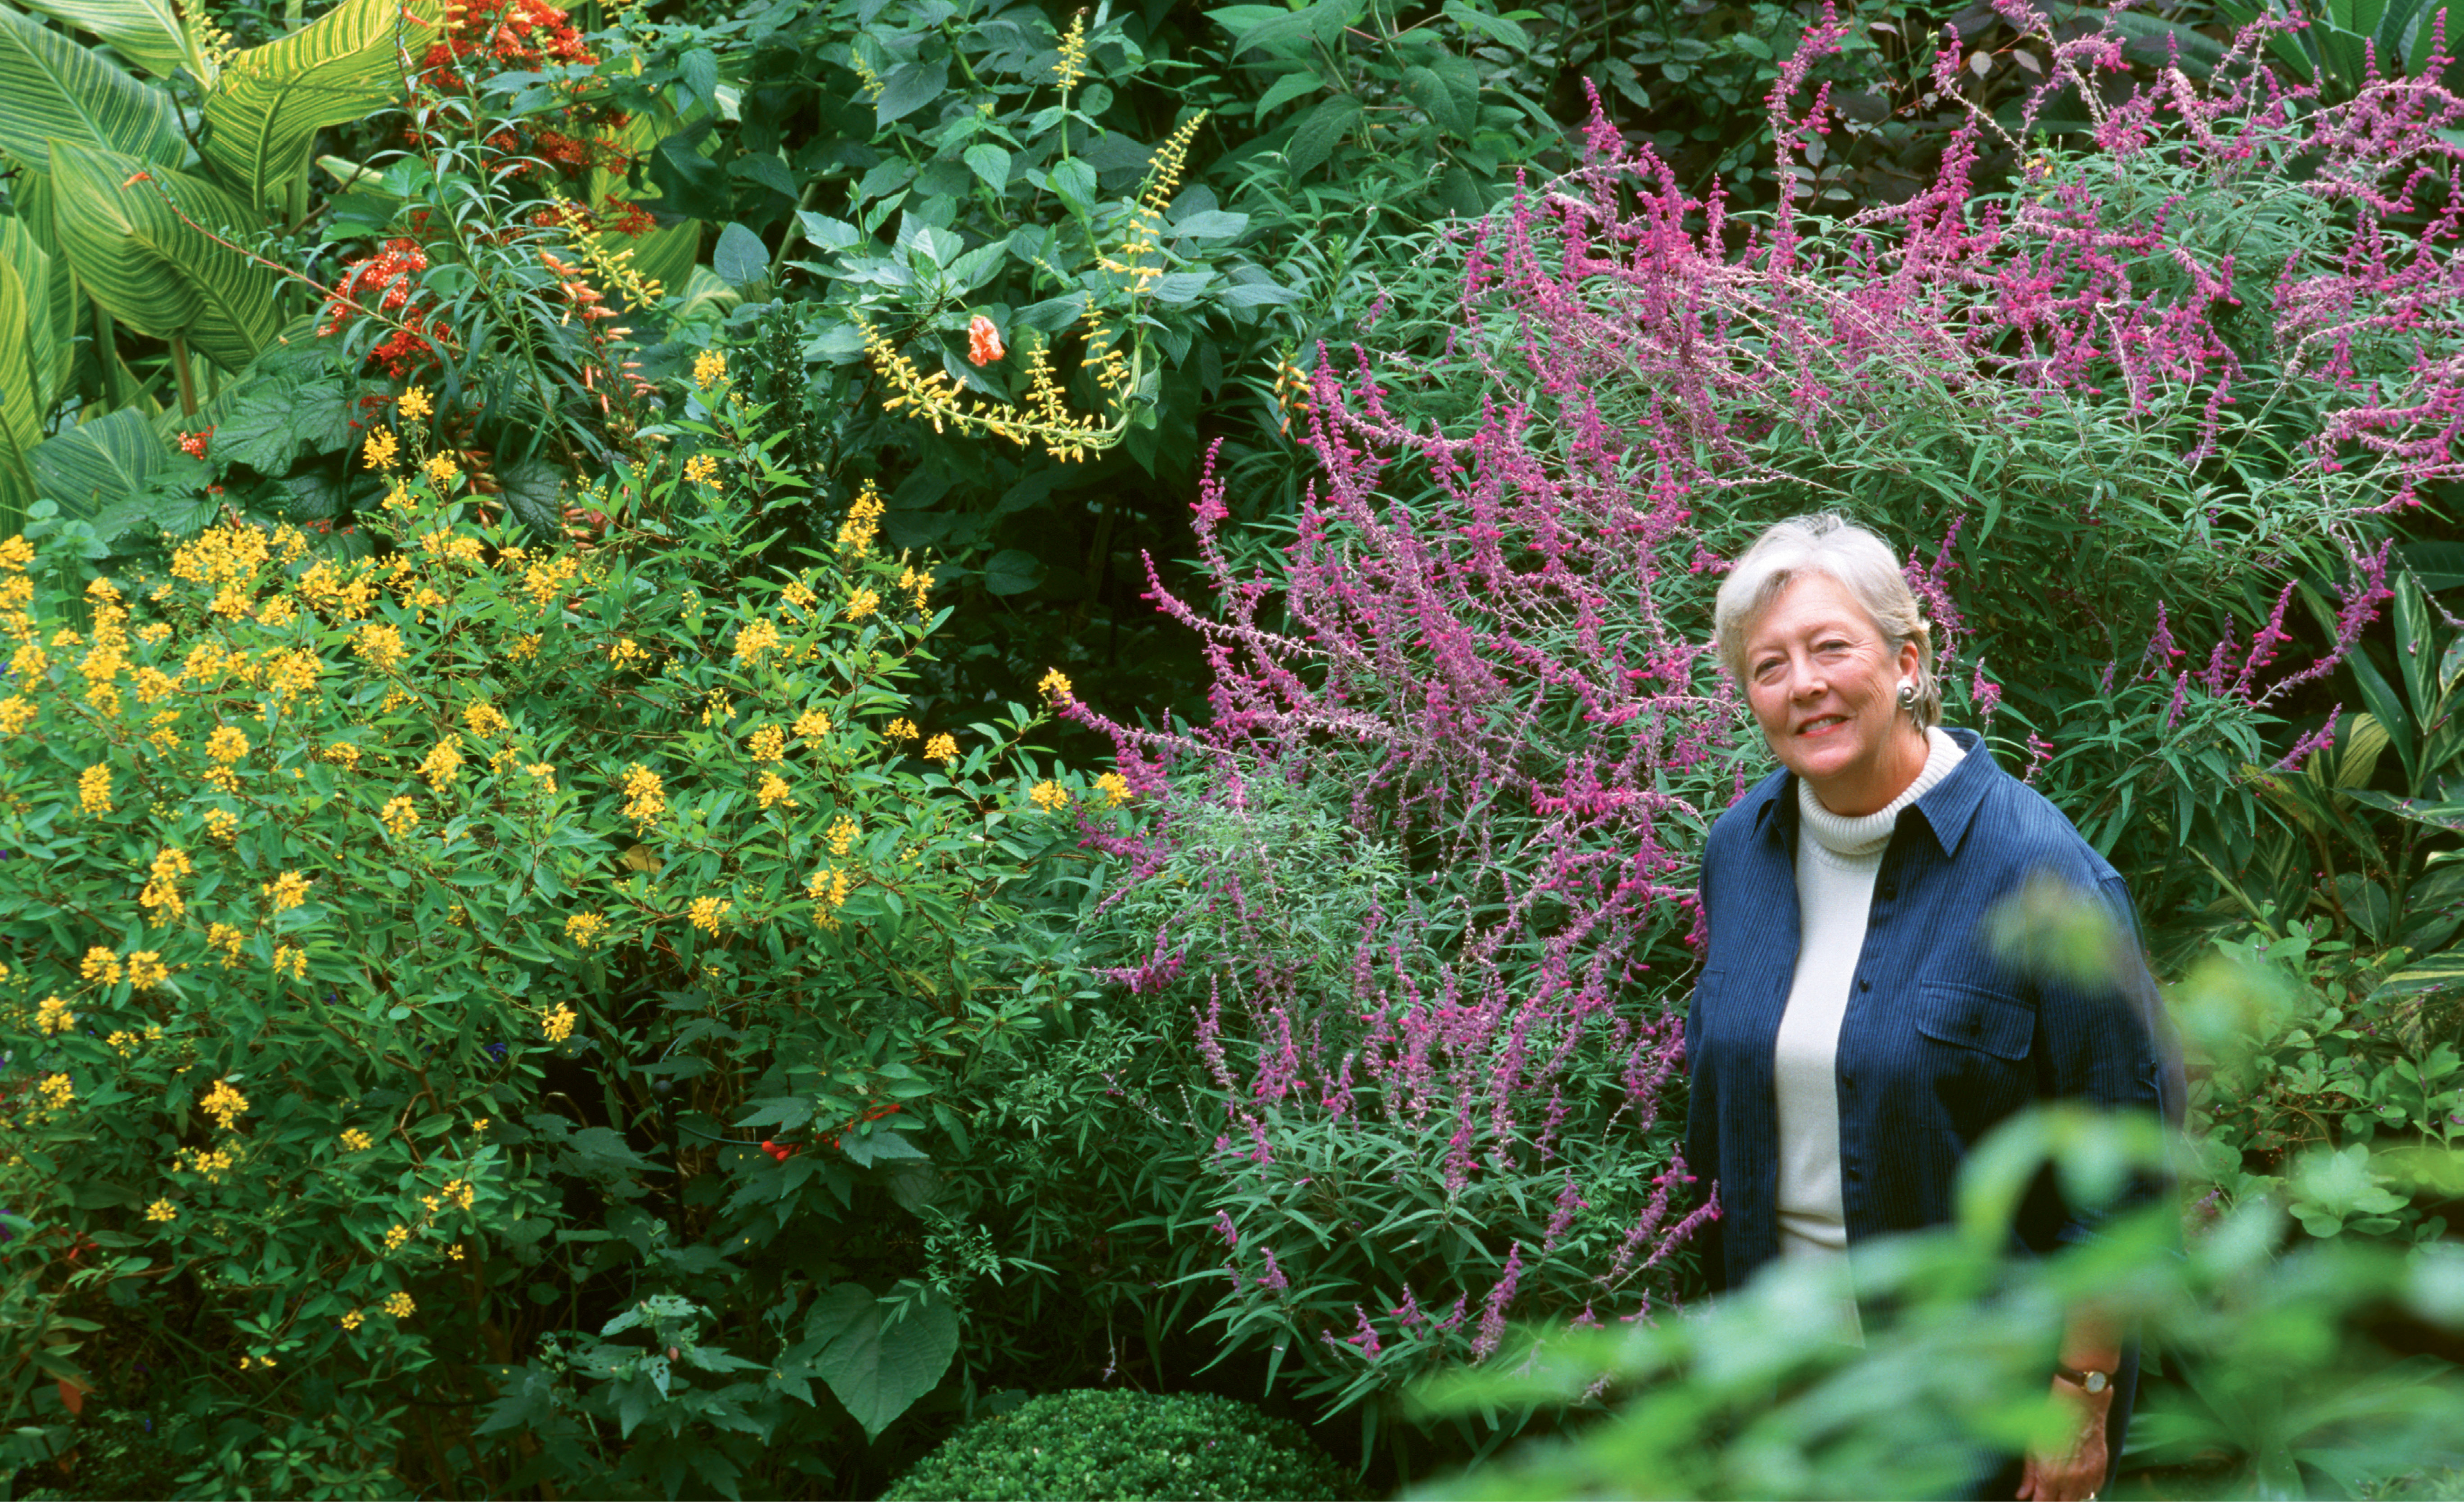 Patti McGee among the Mexican bush sage, butterfly weed, and Alpinia in her Ansonborough garden in 2003; photo by Virginia Weiler